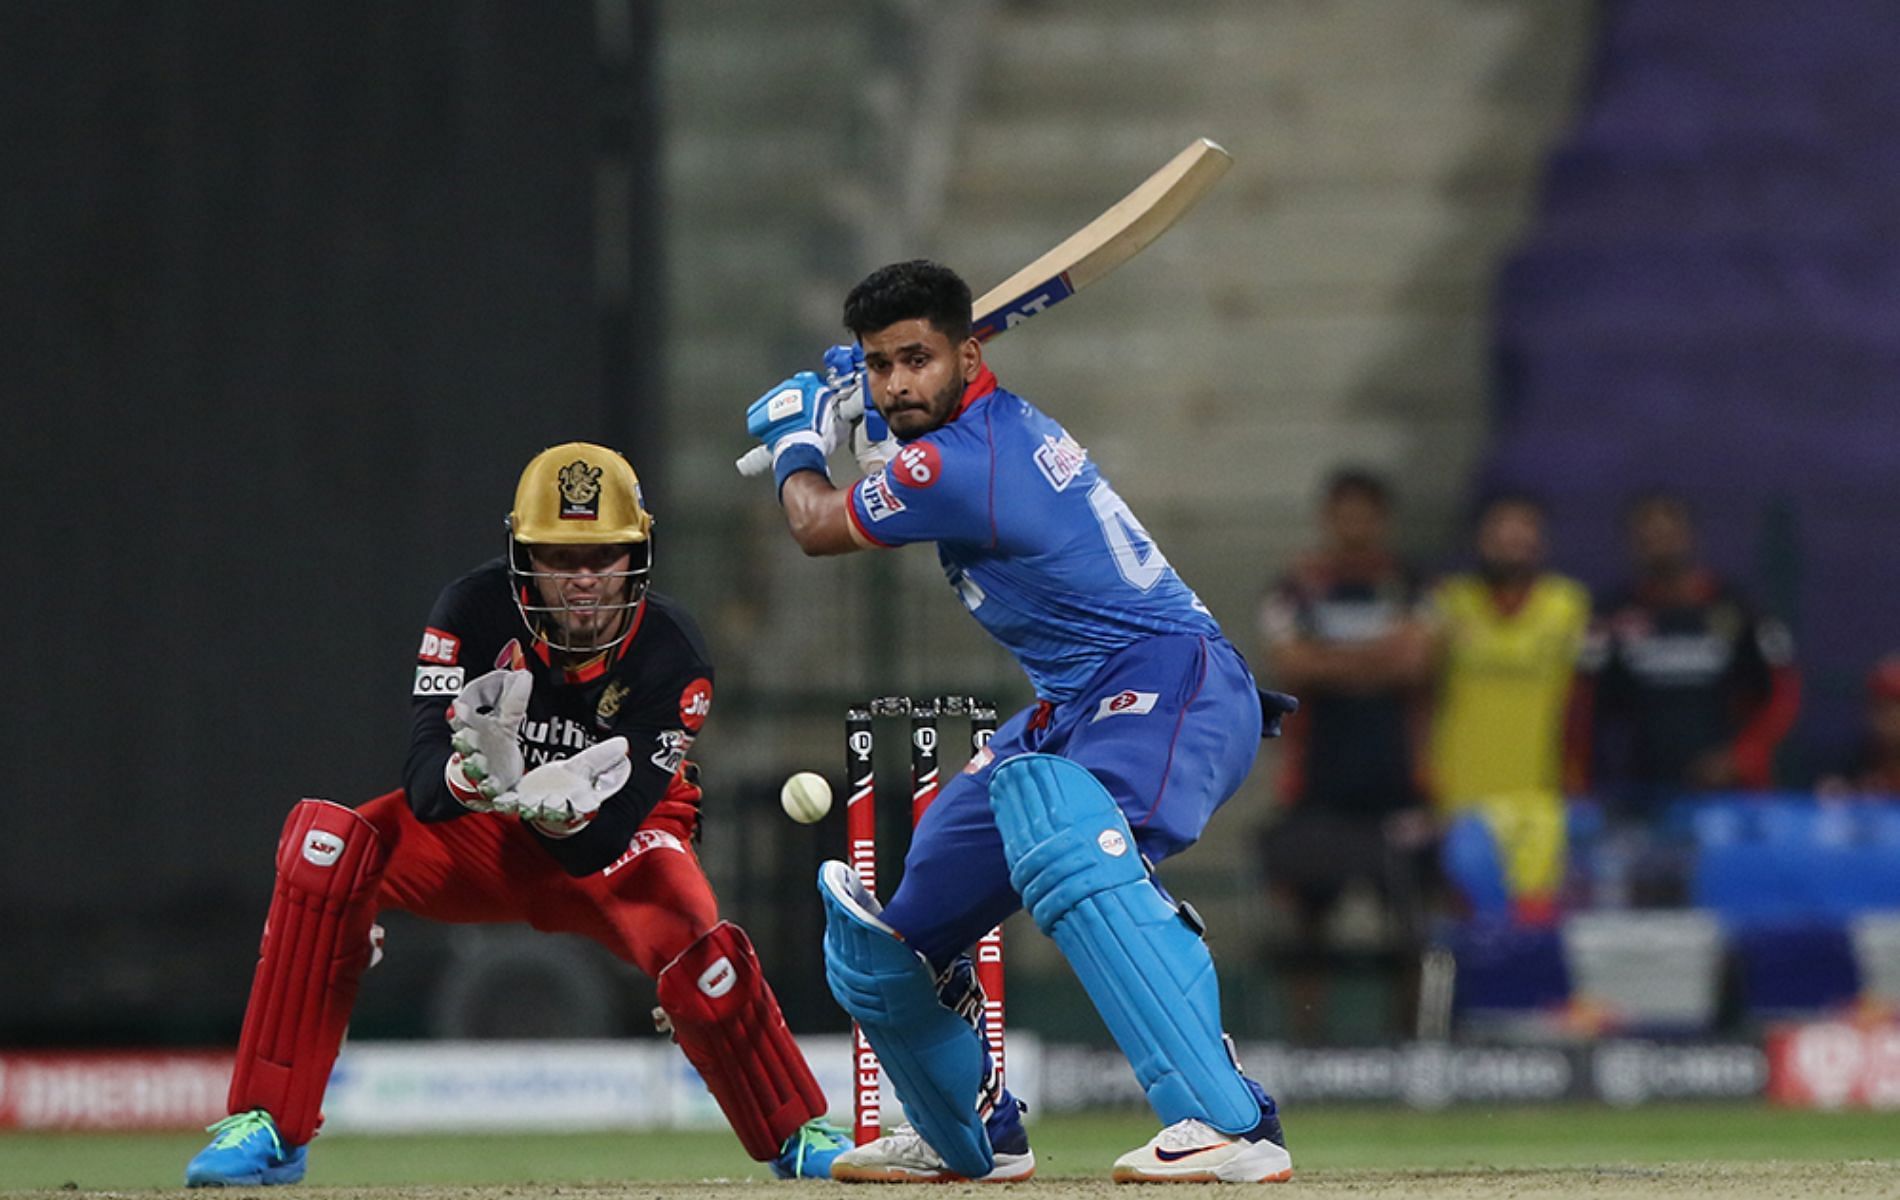 Shreyas Iyer is set to be available in the IPL 2022 mega auction.